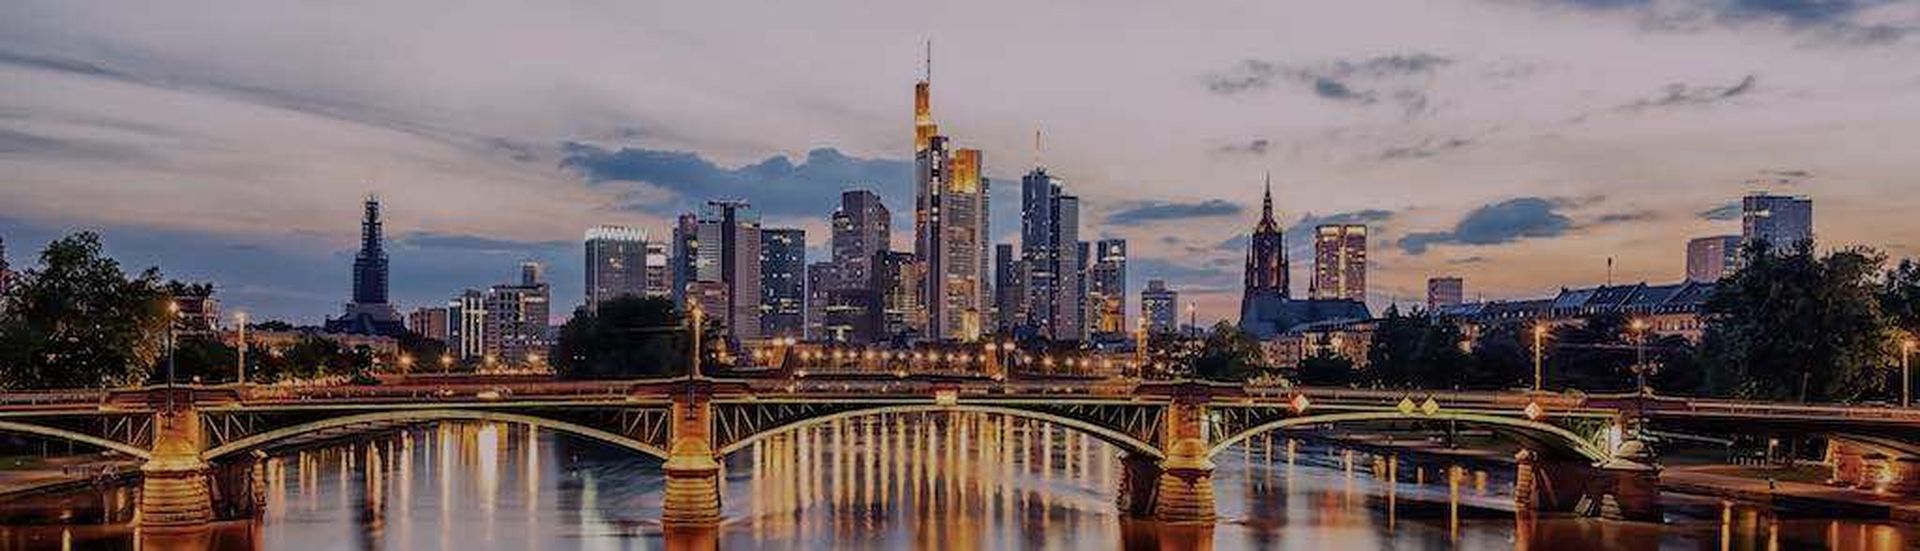 The business district in Frankfurt